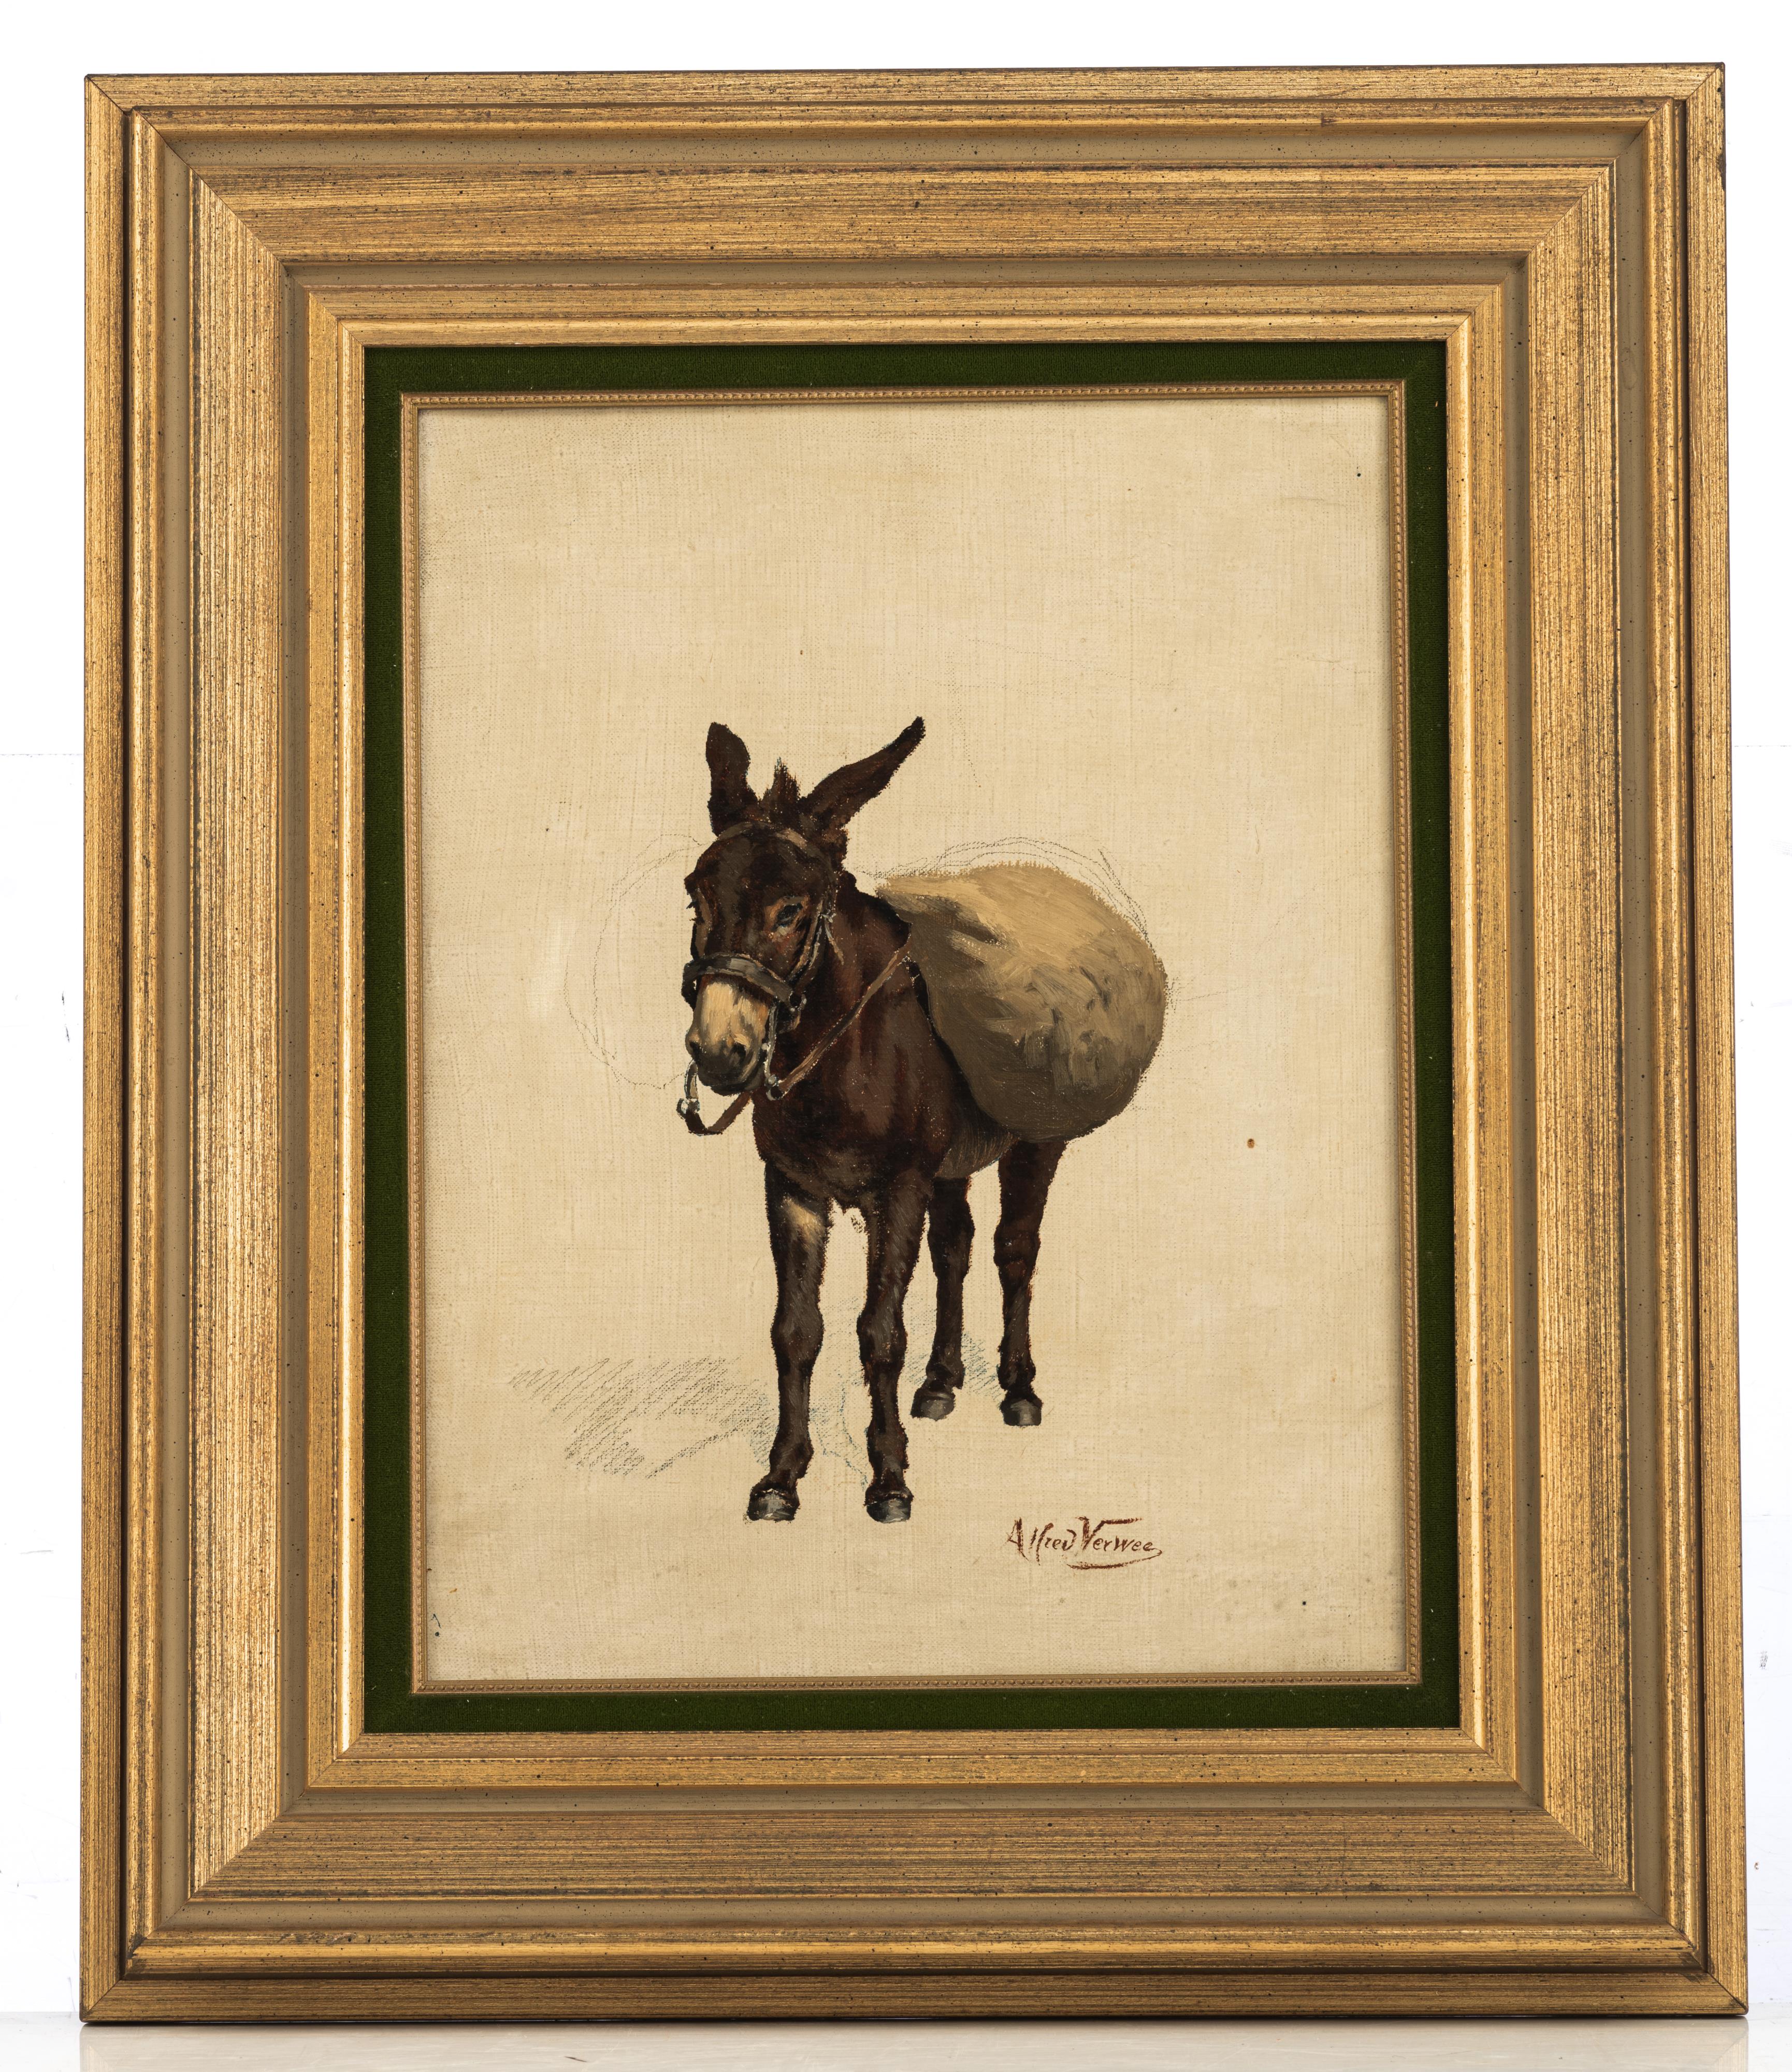 Verwee A., the packed donkey, an oil and pencil sketch on canvas, 27,5 x 35,5 cm - Image 2 of 7